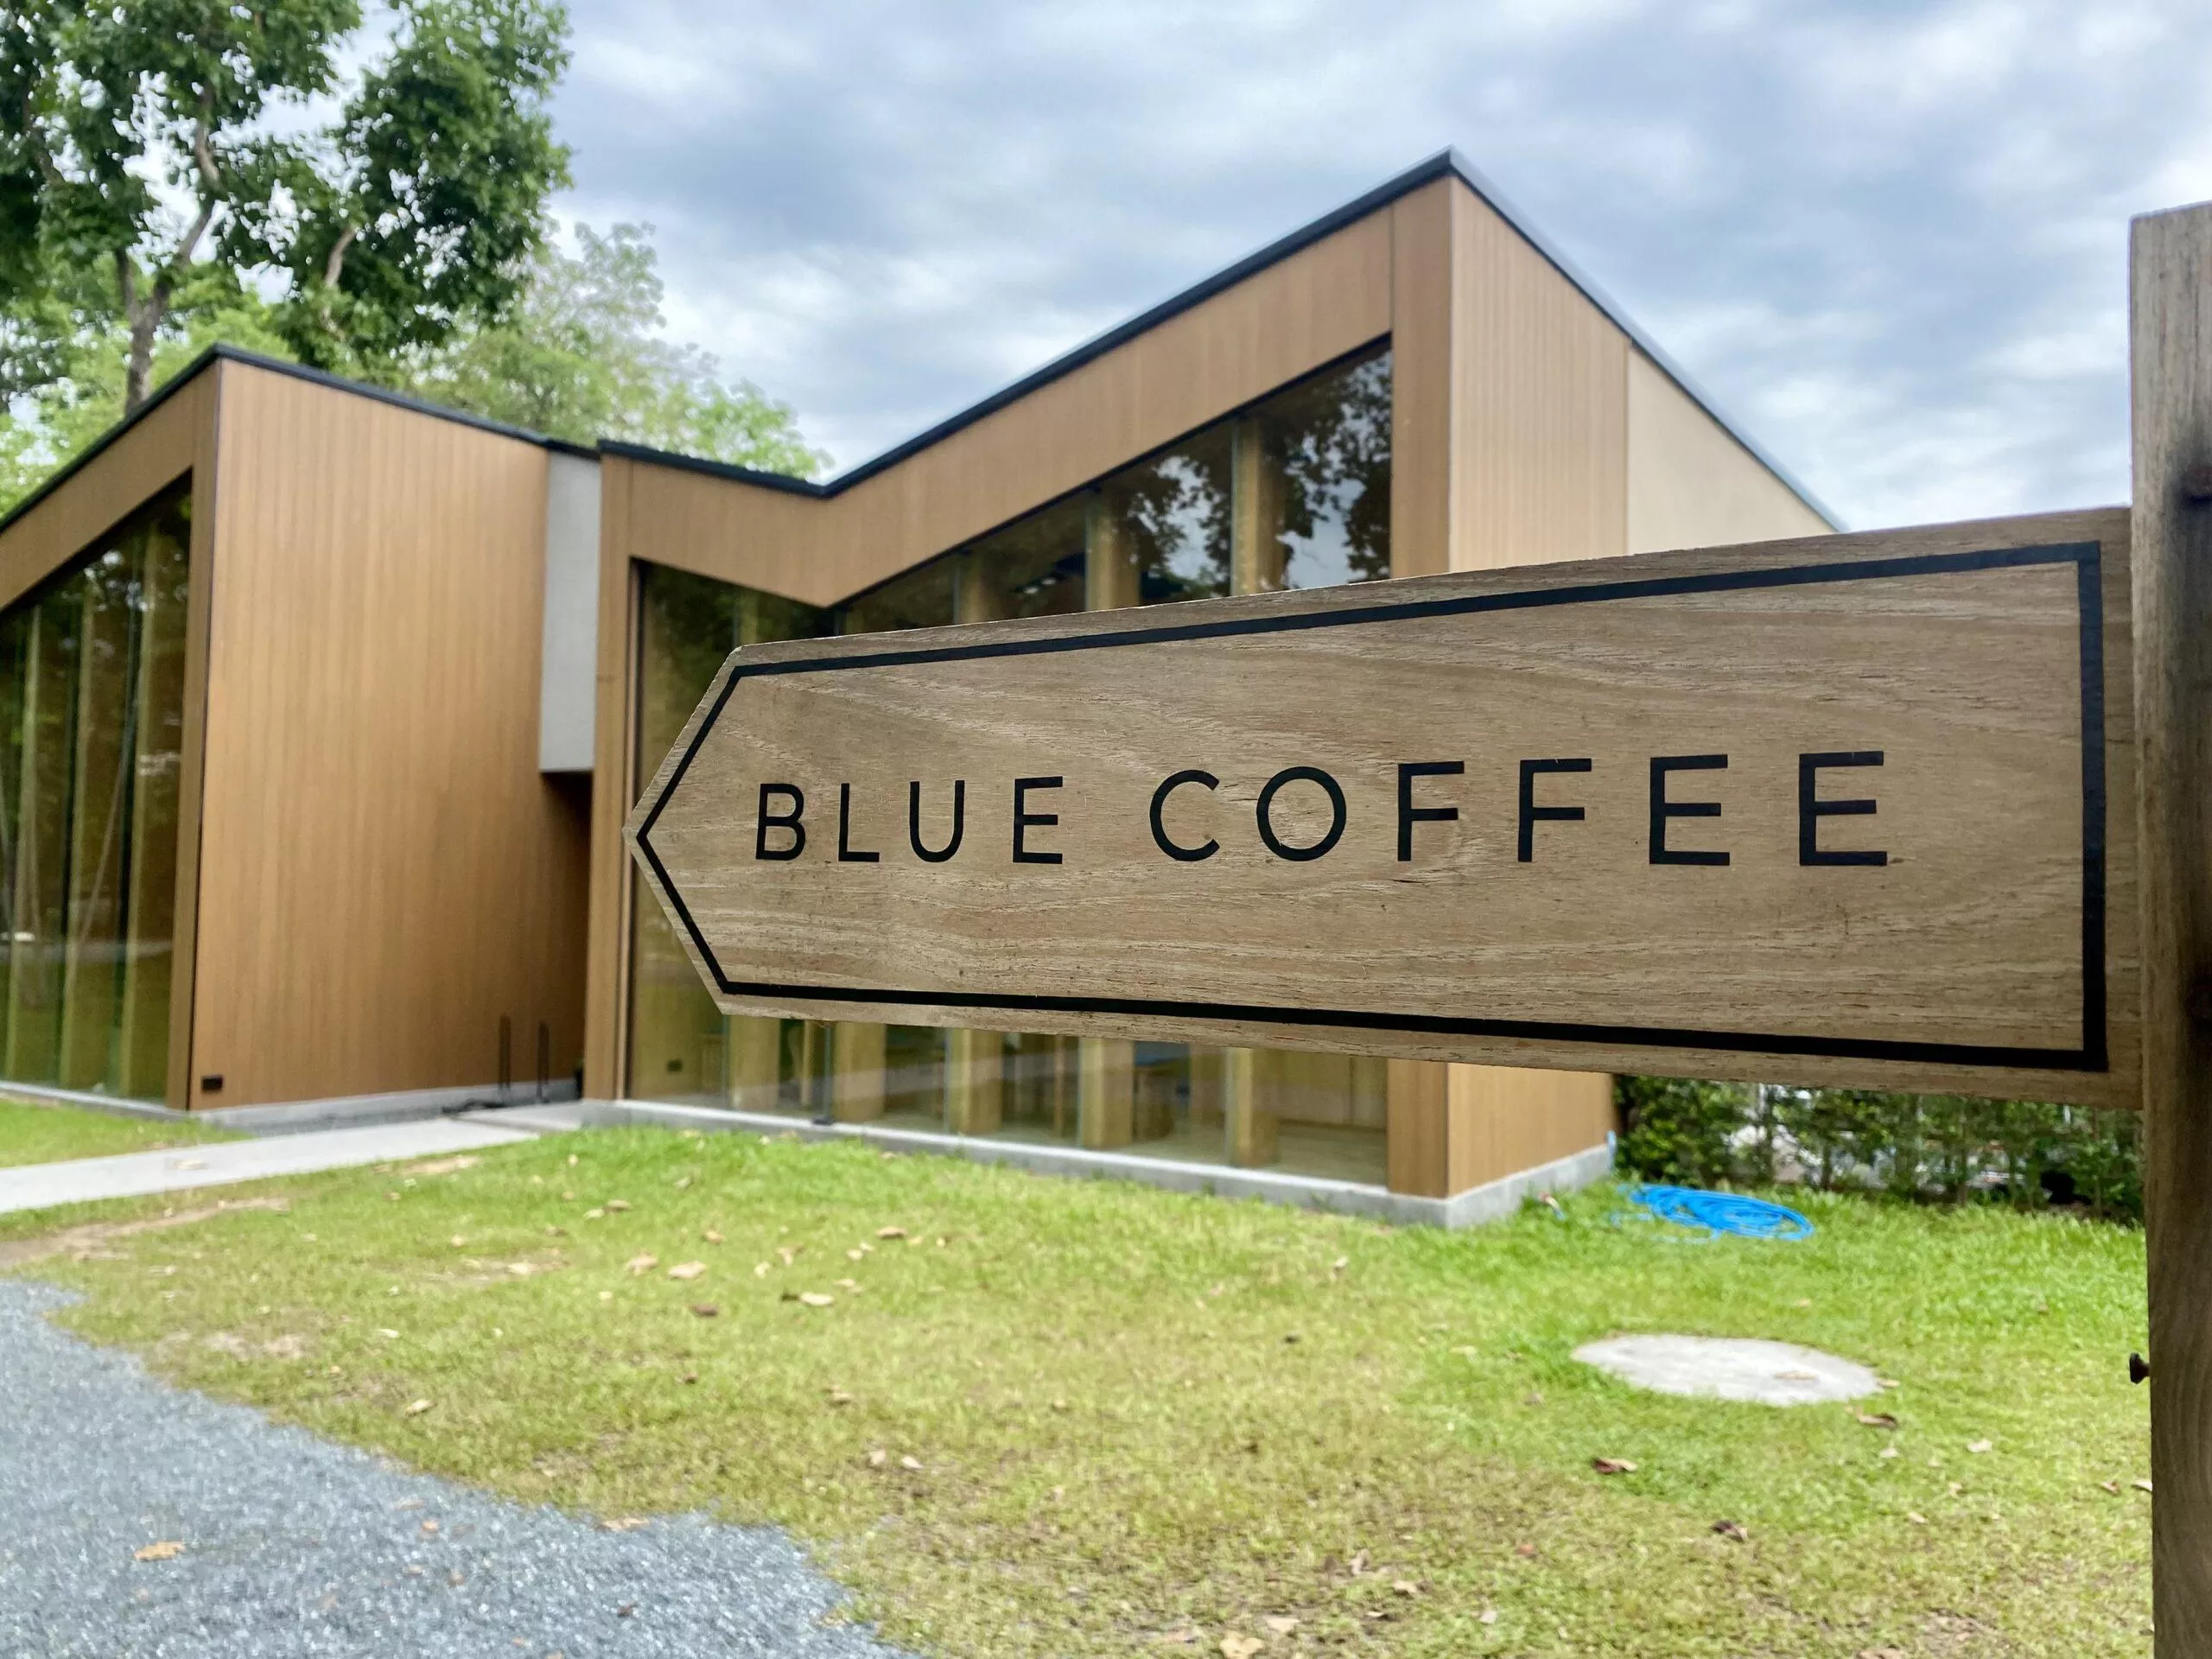 A wooden sign saying "Blue Coffee" and pointing towards the building behind it.